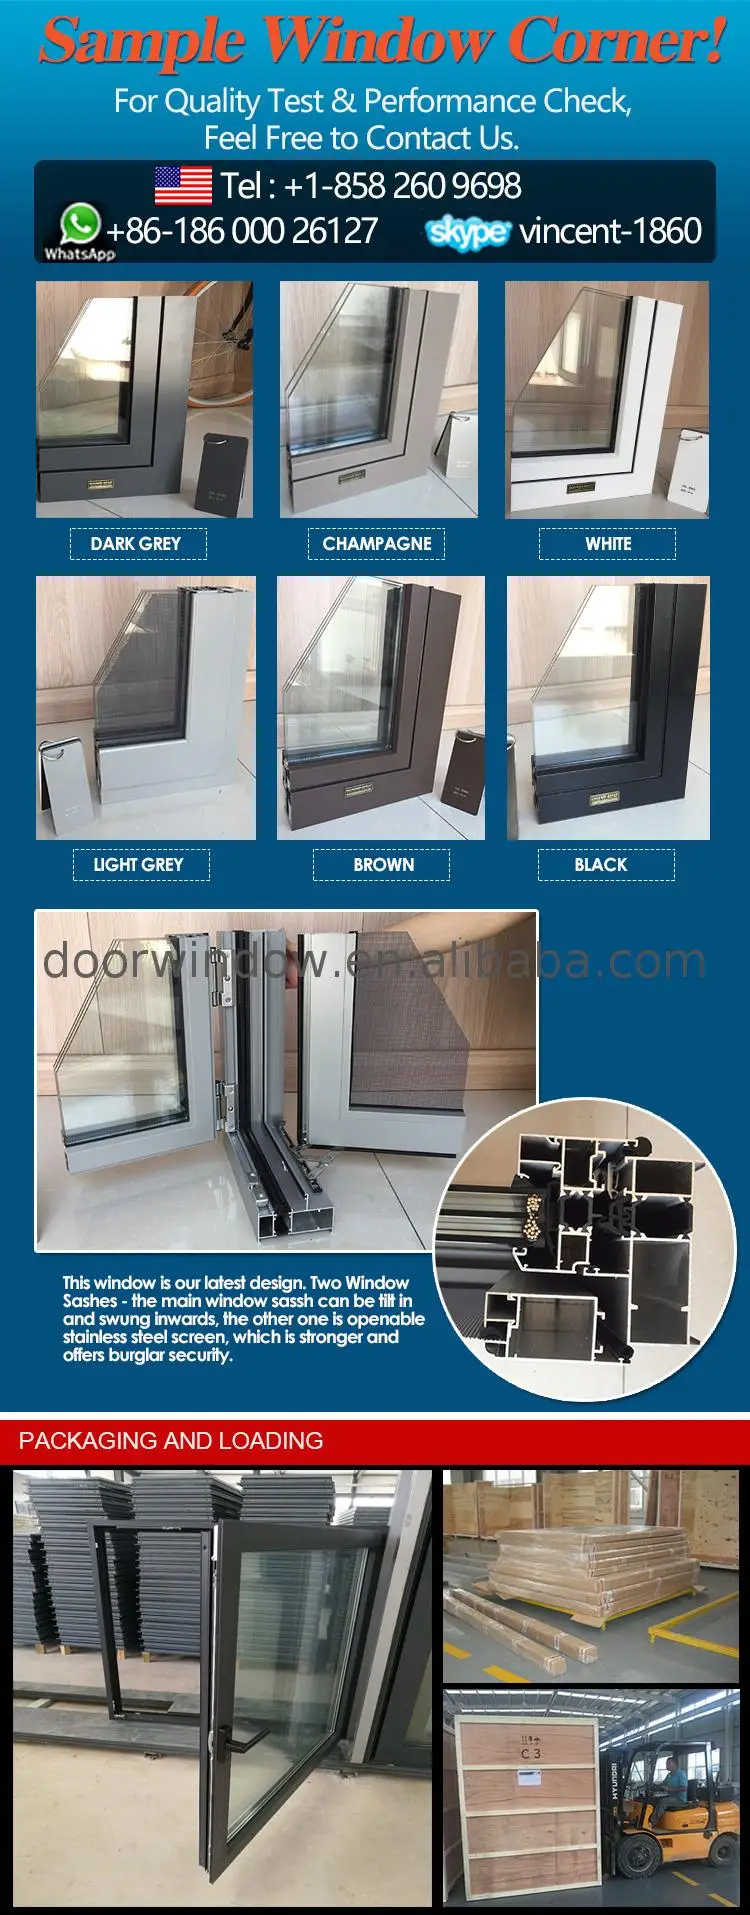 Casement windows and doors made by factory in shanghai comply with american standard 24 x 72